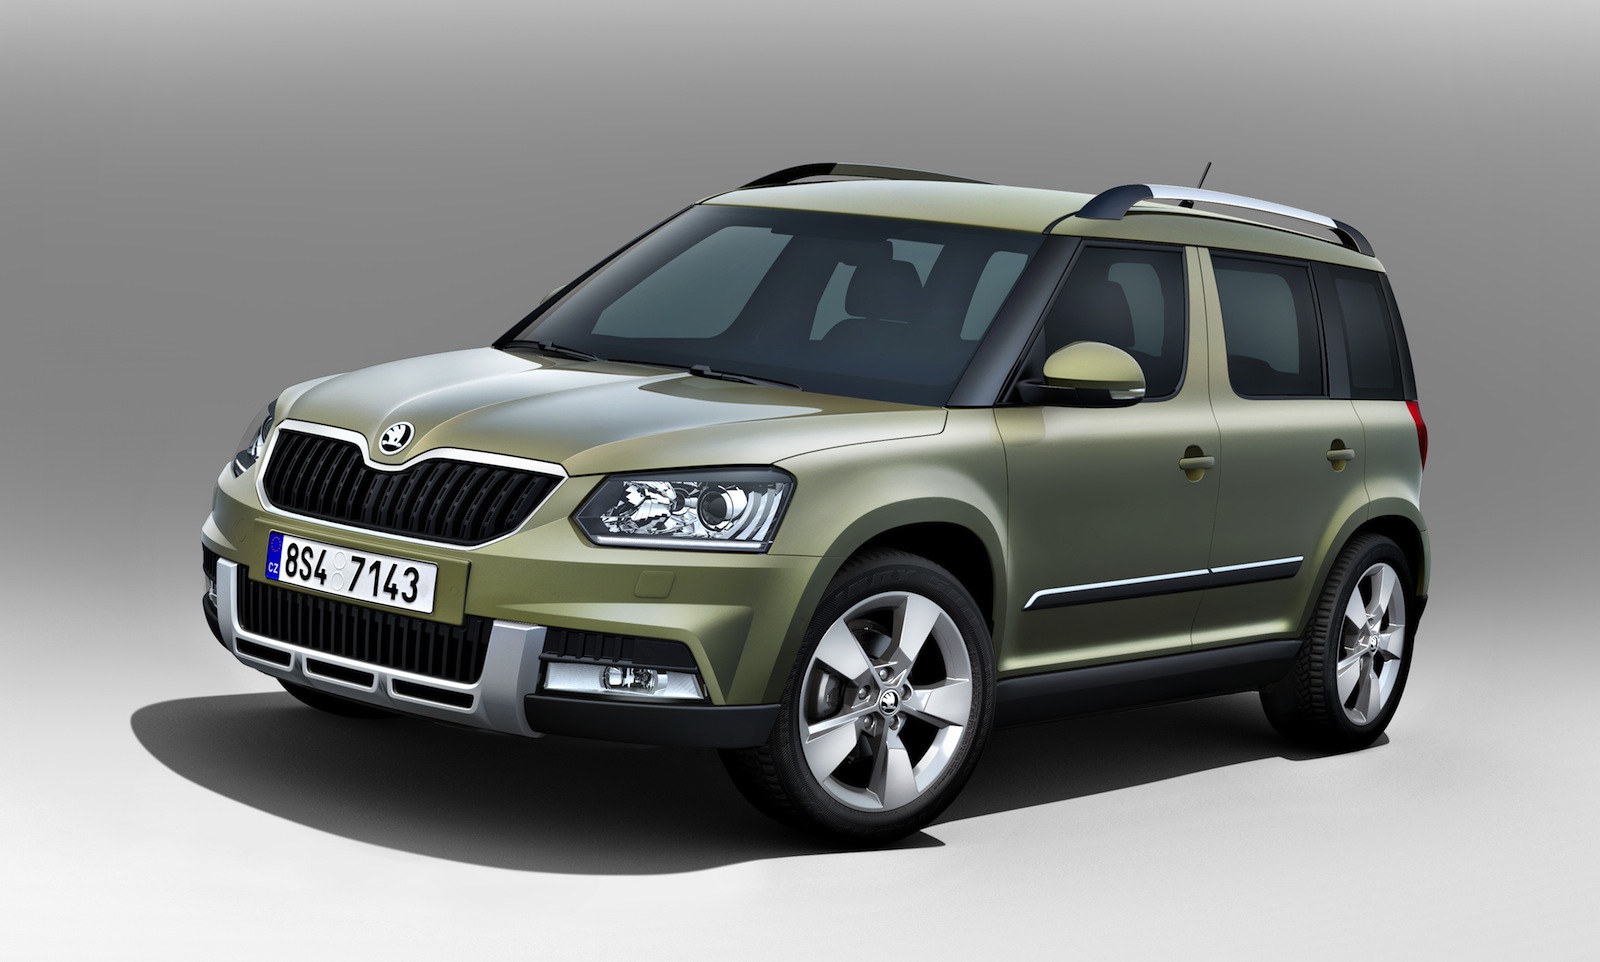 12 Skoda Yeti: two styles available in facelifted SUV range